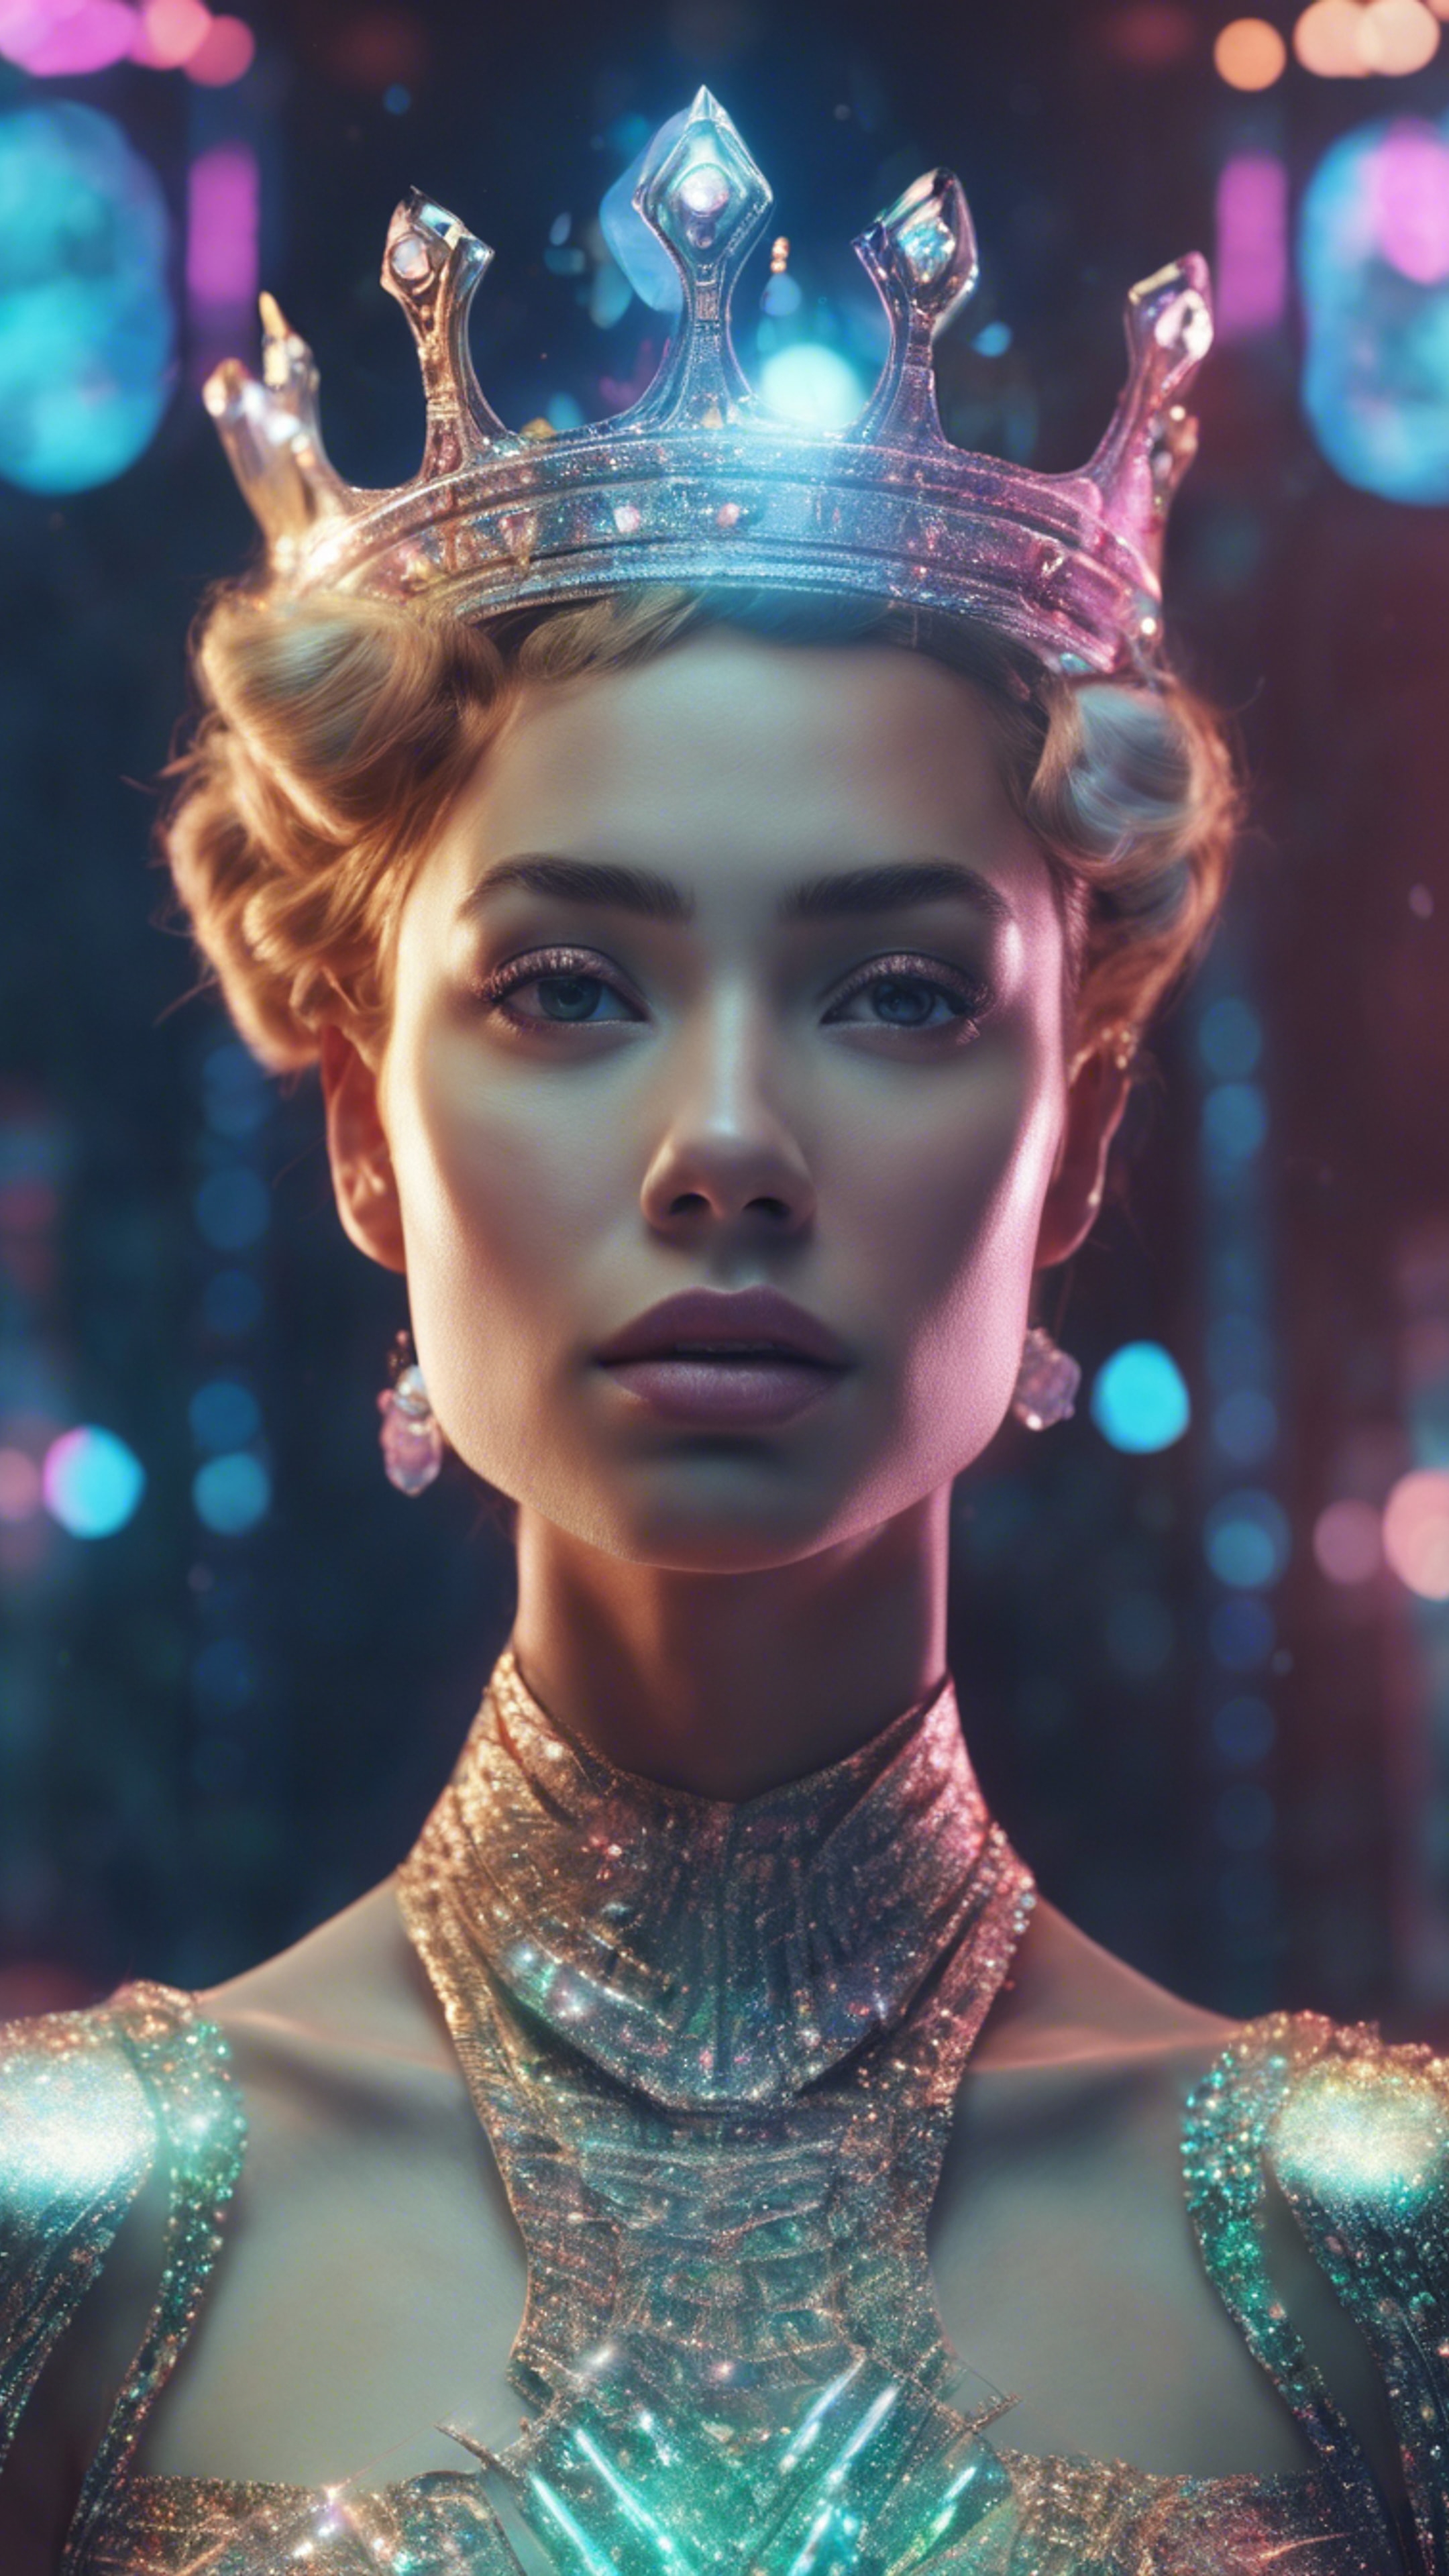 A holographic crown floating above a futuristic space queen, casting an extraterrestrial glow onto her regal features.壁紙[b8d757f5bf564fa98364]